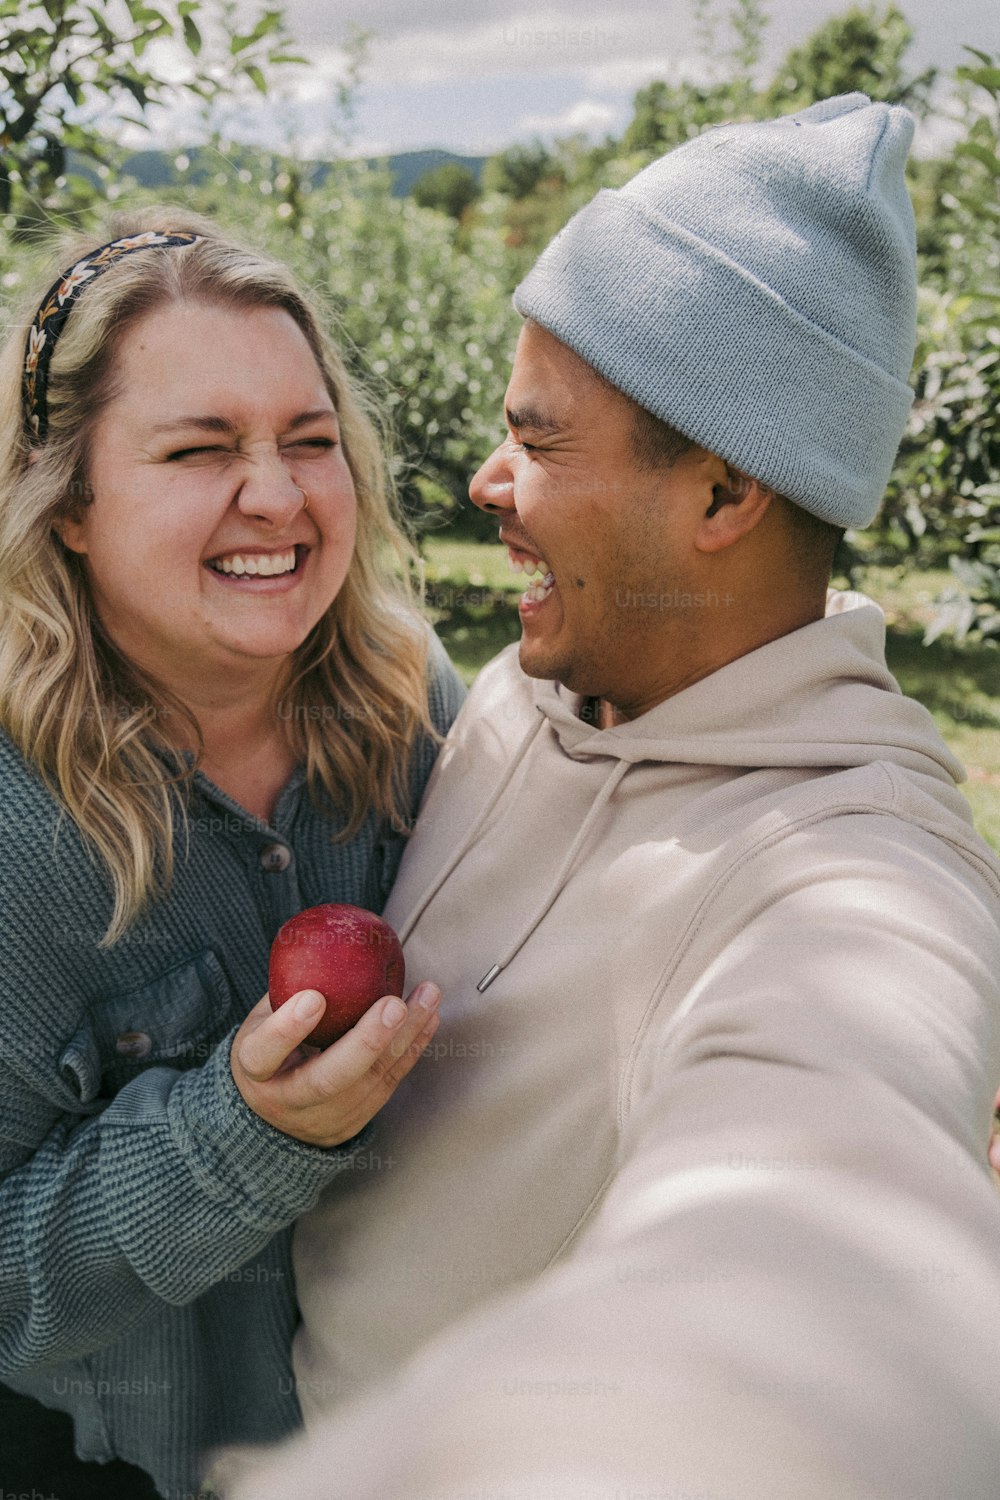 a man and a woman holding an apple together